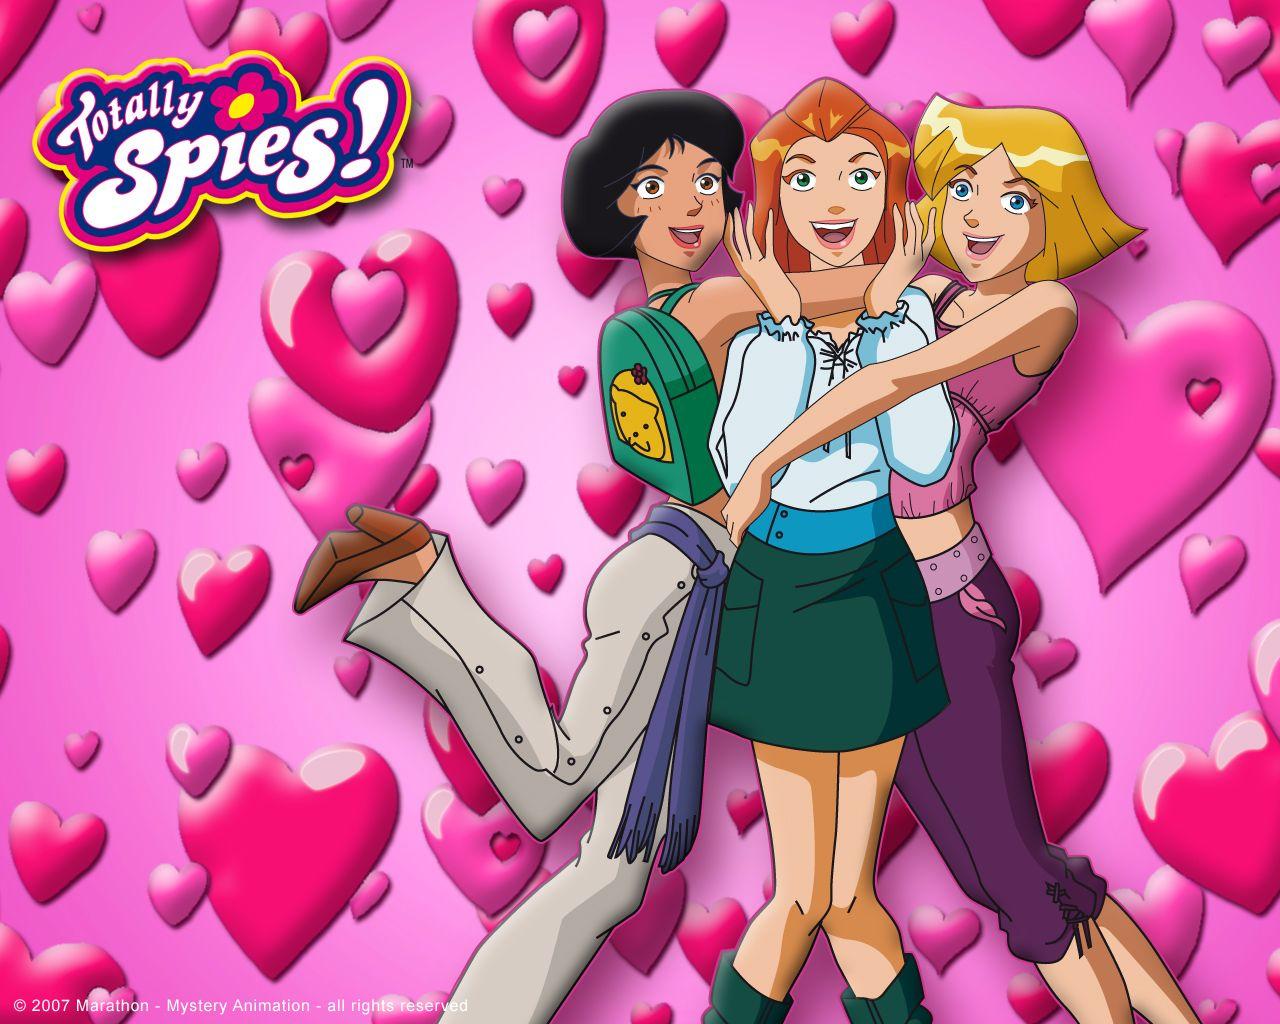 Wallpaper Totally Spies